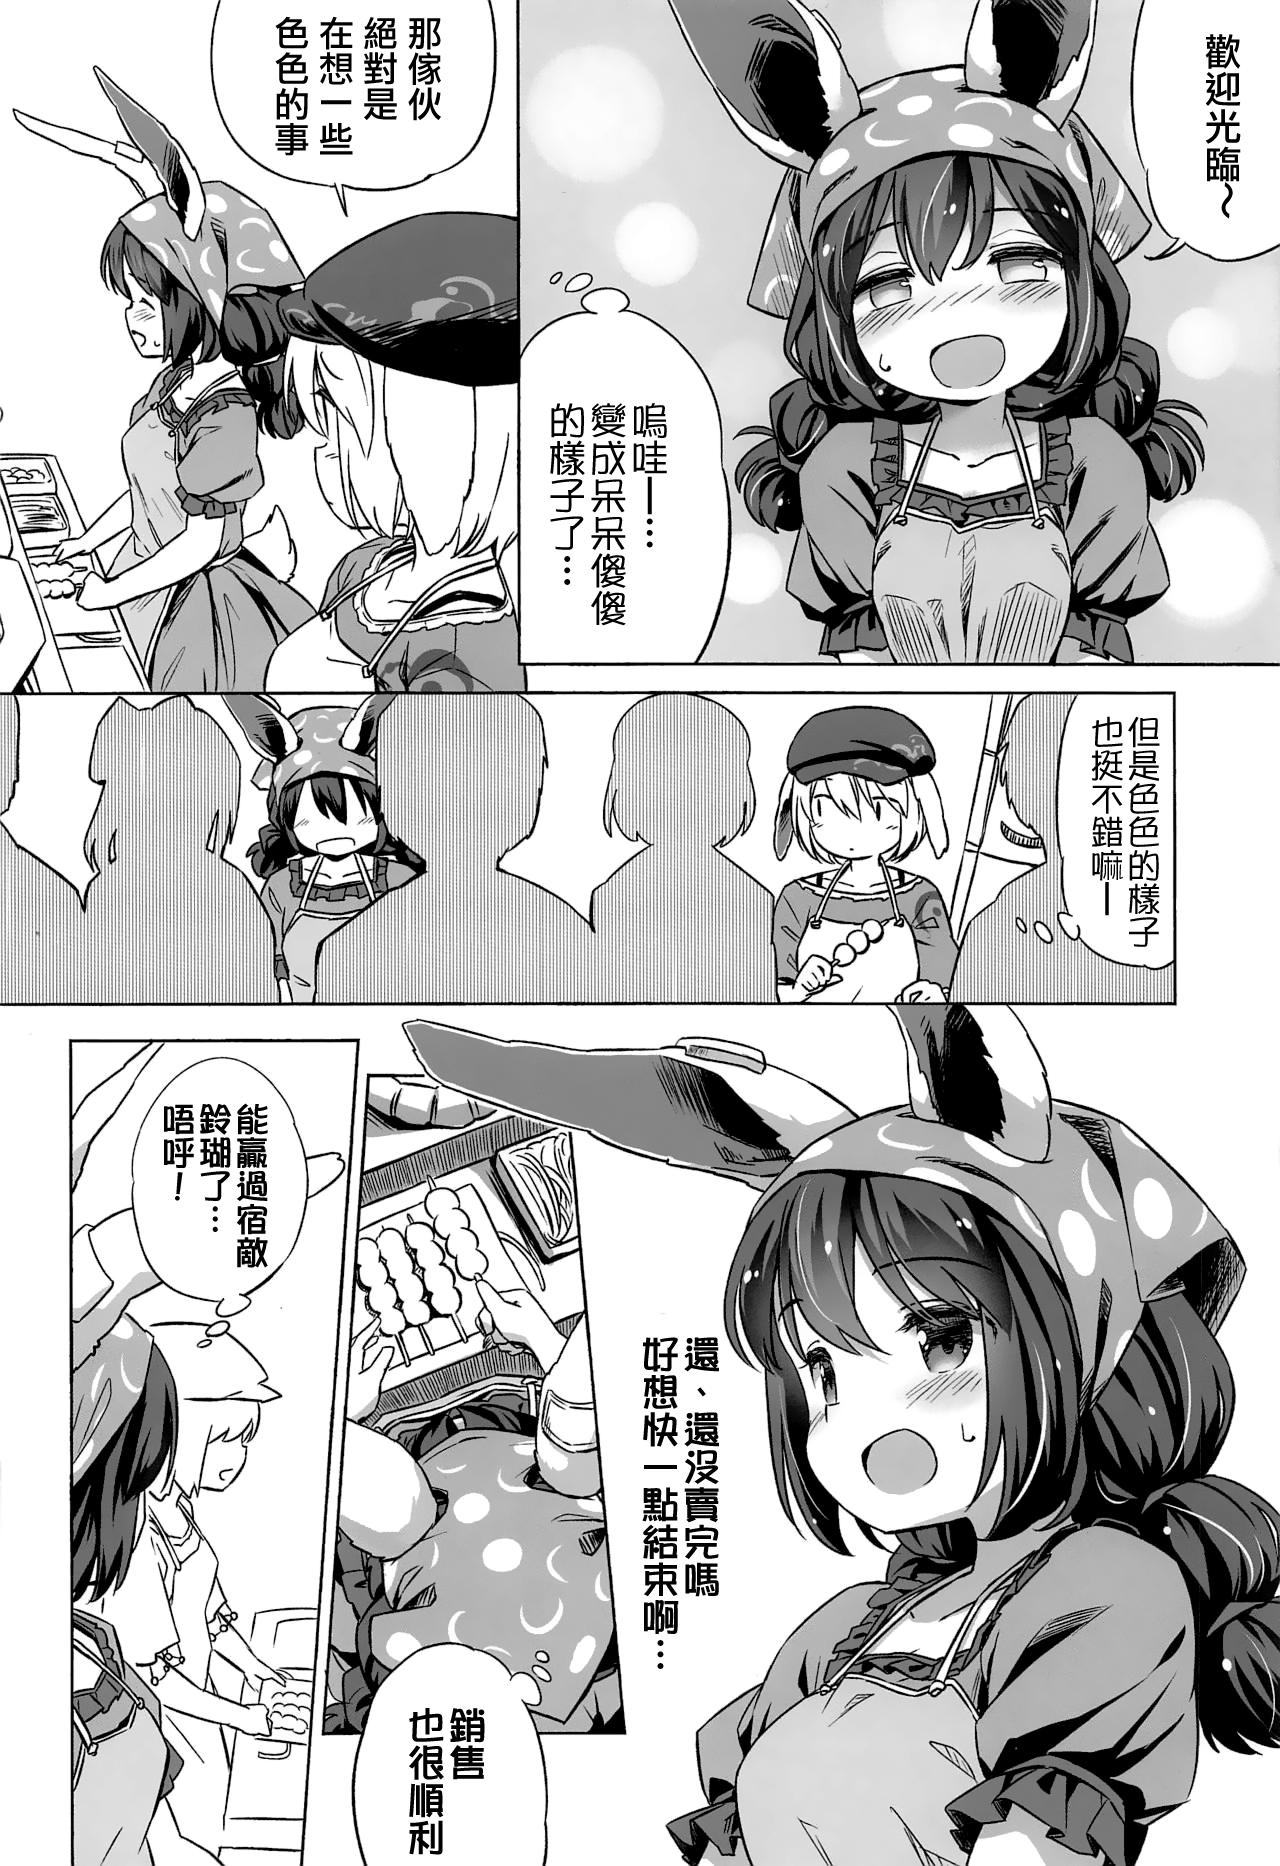 Thailand Granny Smith Mating - Touhou project Freak - Page 9